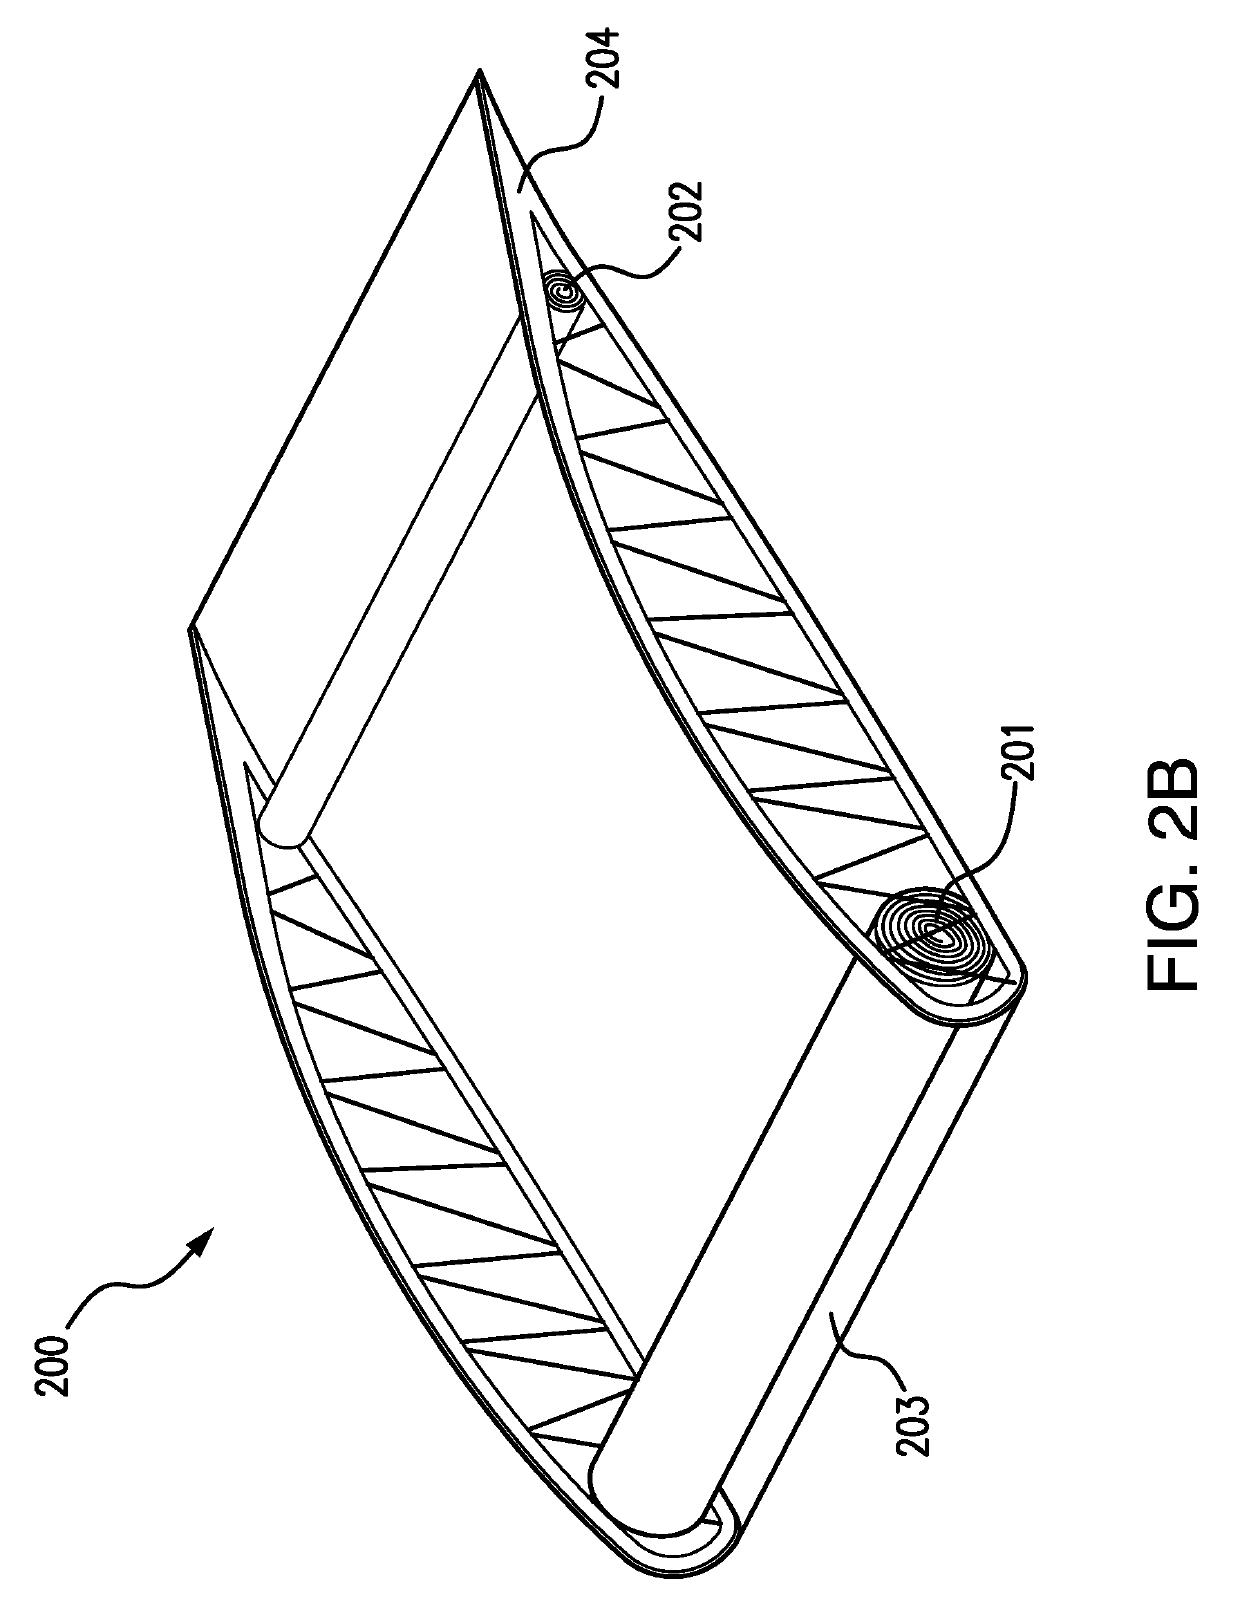 Airfoil body including a moveable section of an outer surface carrying an array of transducer elements